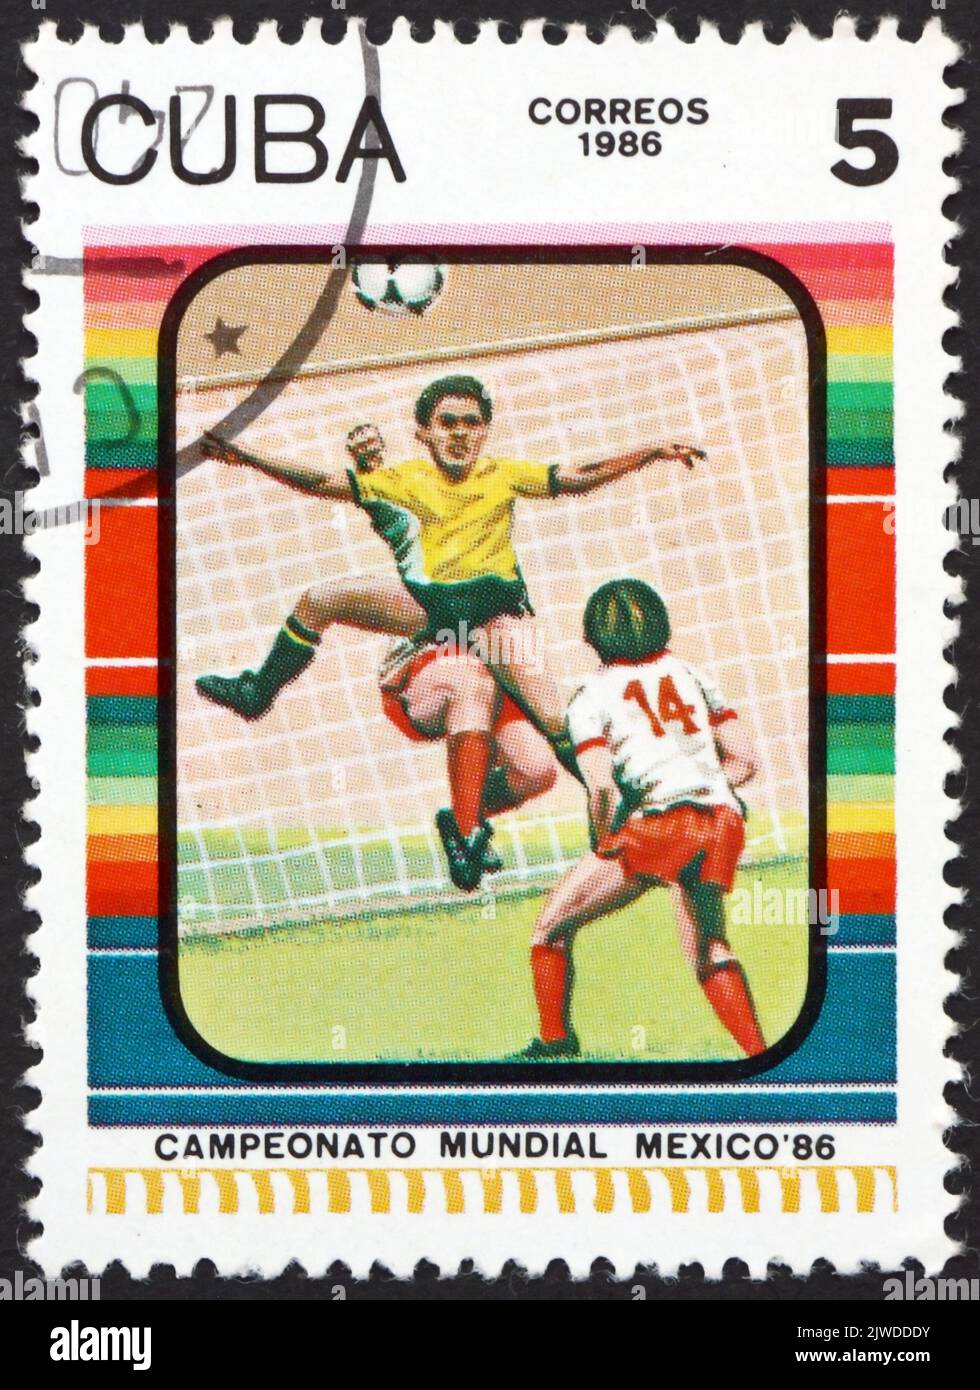 CUBA - CIRCA 1986: a stamp printed in Cuba shows soccer players in action, 1986 World Cup Soccer Championships, Mexico, circa 1986 Stock Photo